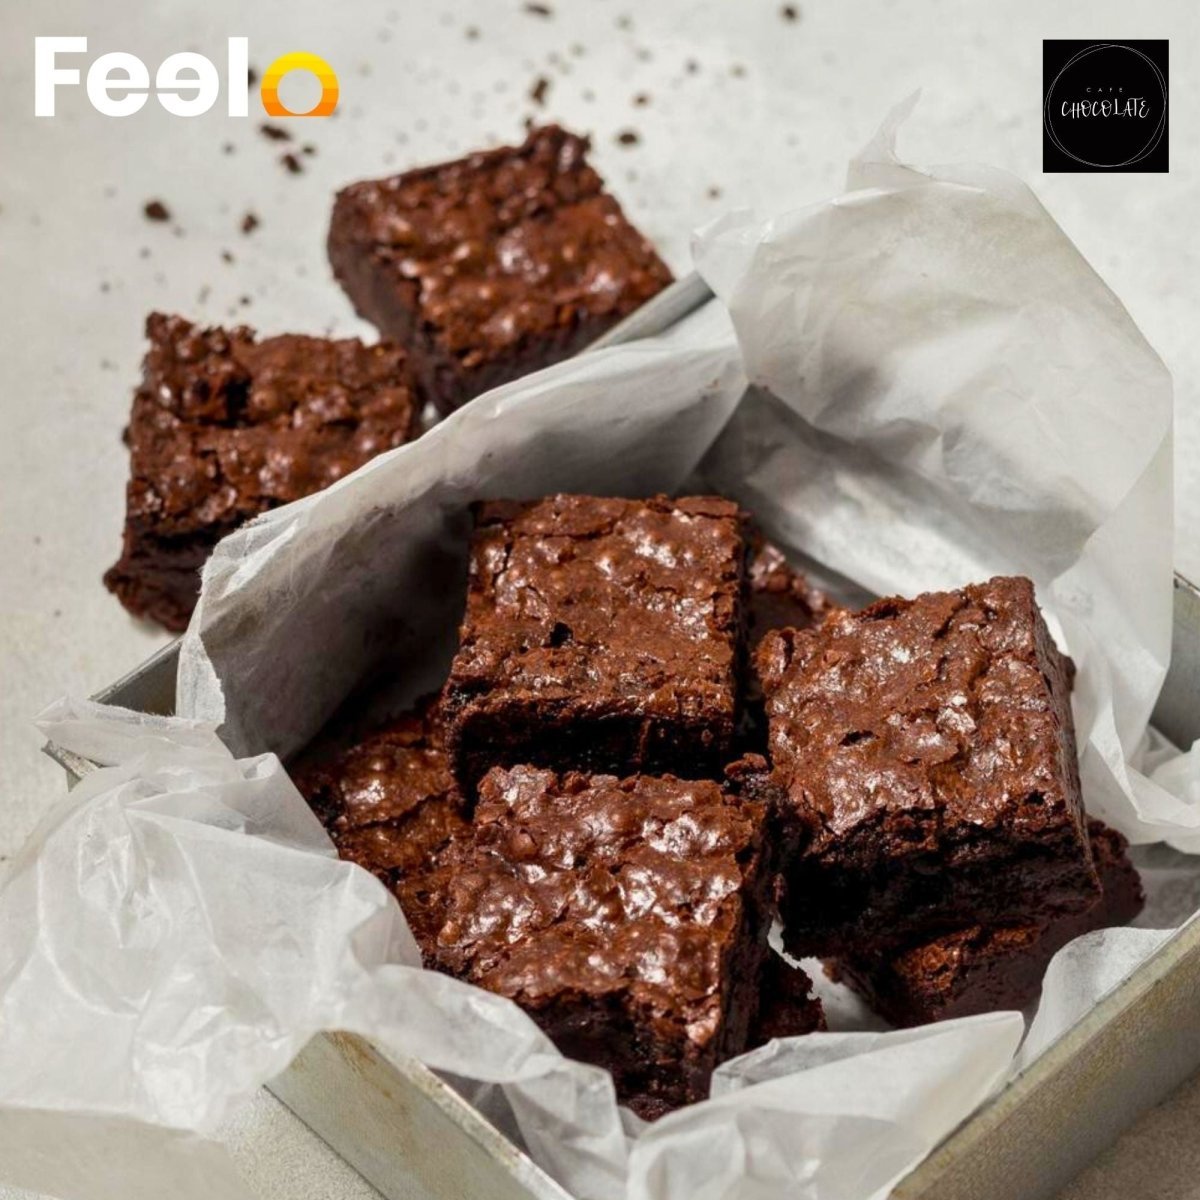 1x Homemade Classic Brownie in an Inviting Environment - Café Chocolate, Colombo 05 | Feelo